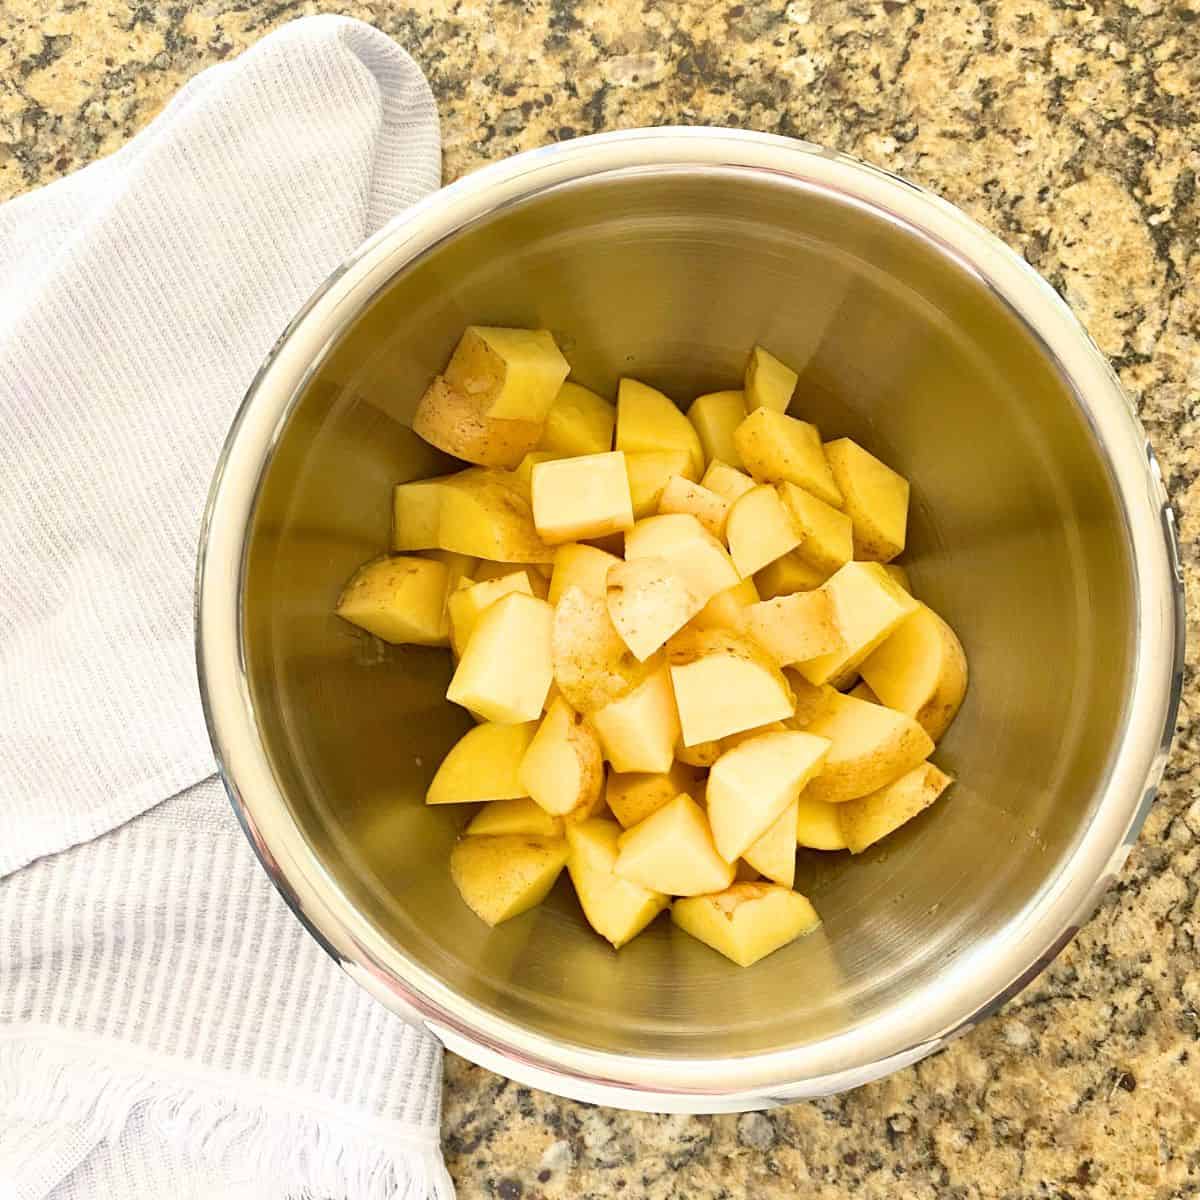 Raw buttered yellow potatoes in a stainless steel mixing bowl